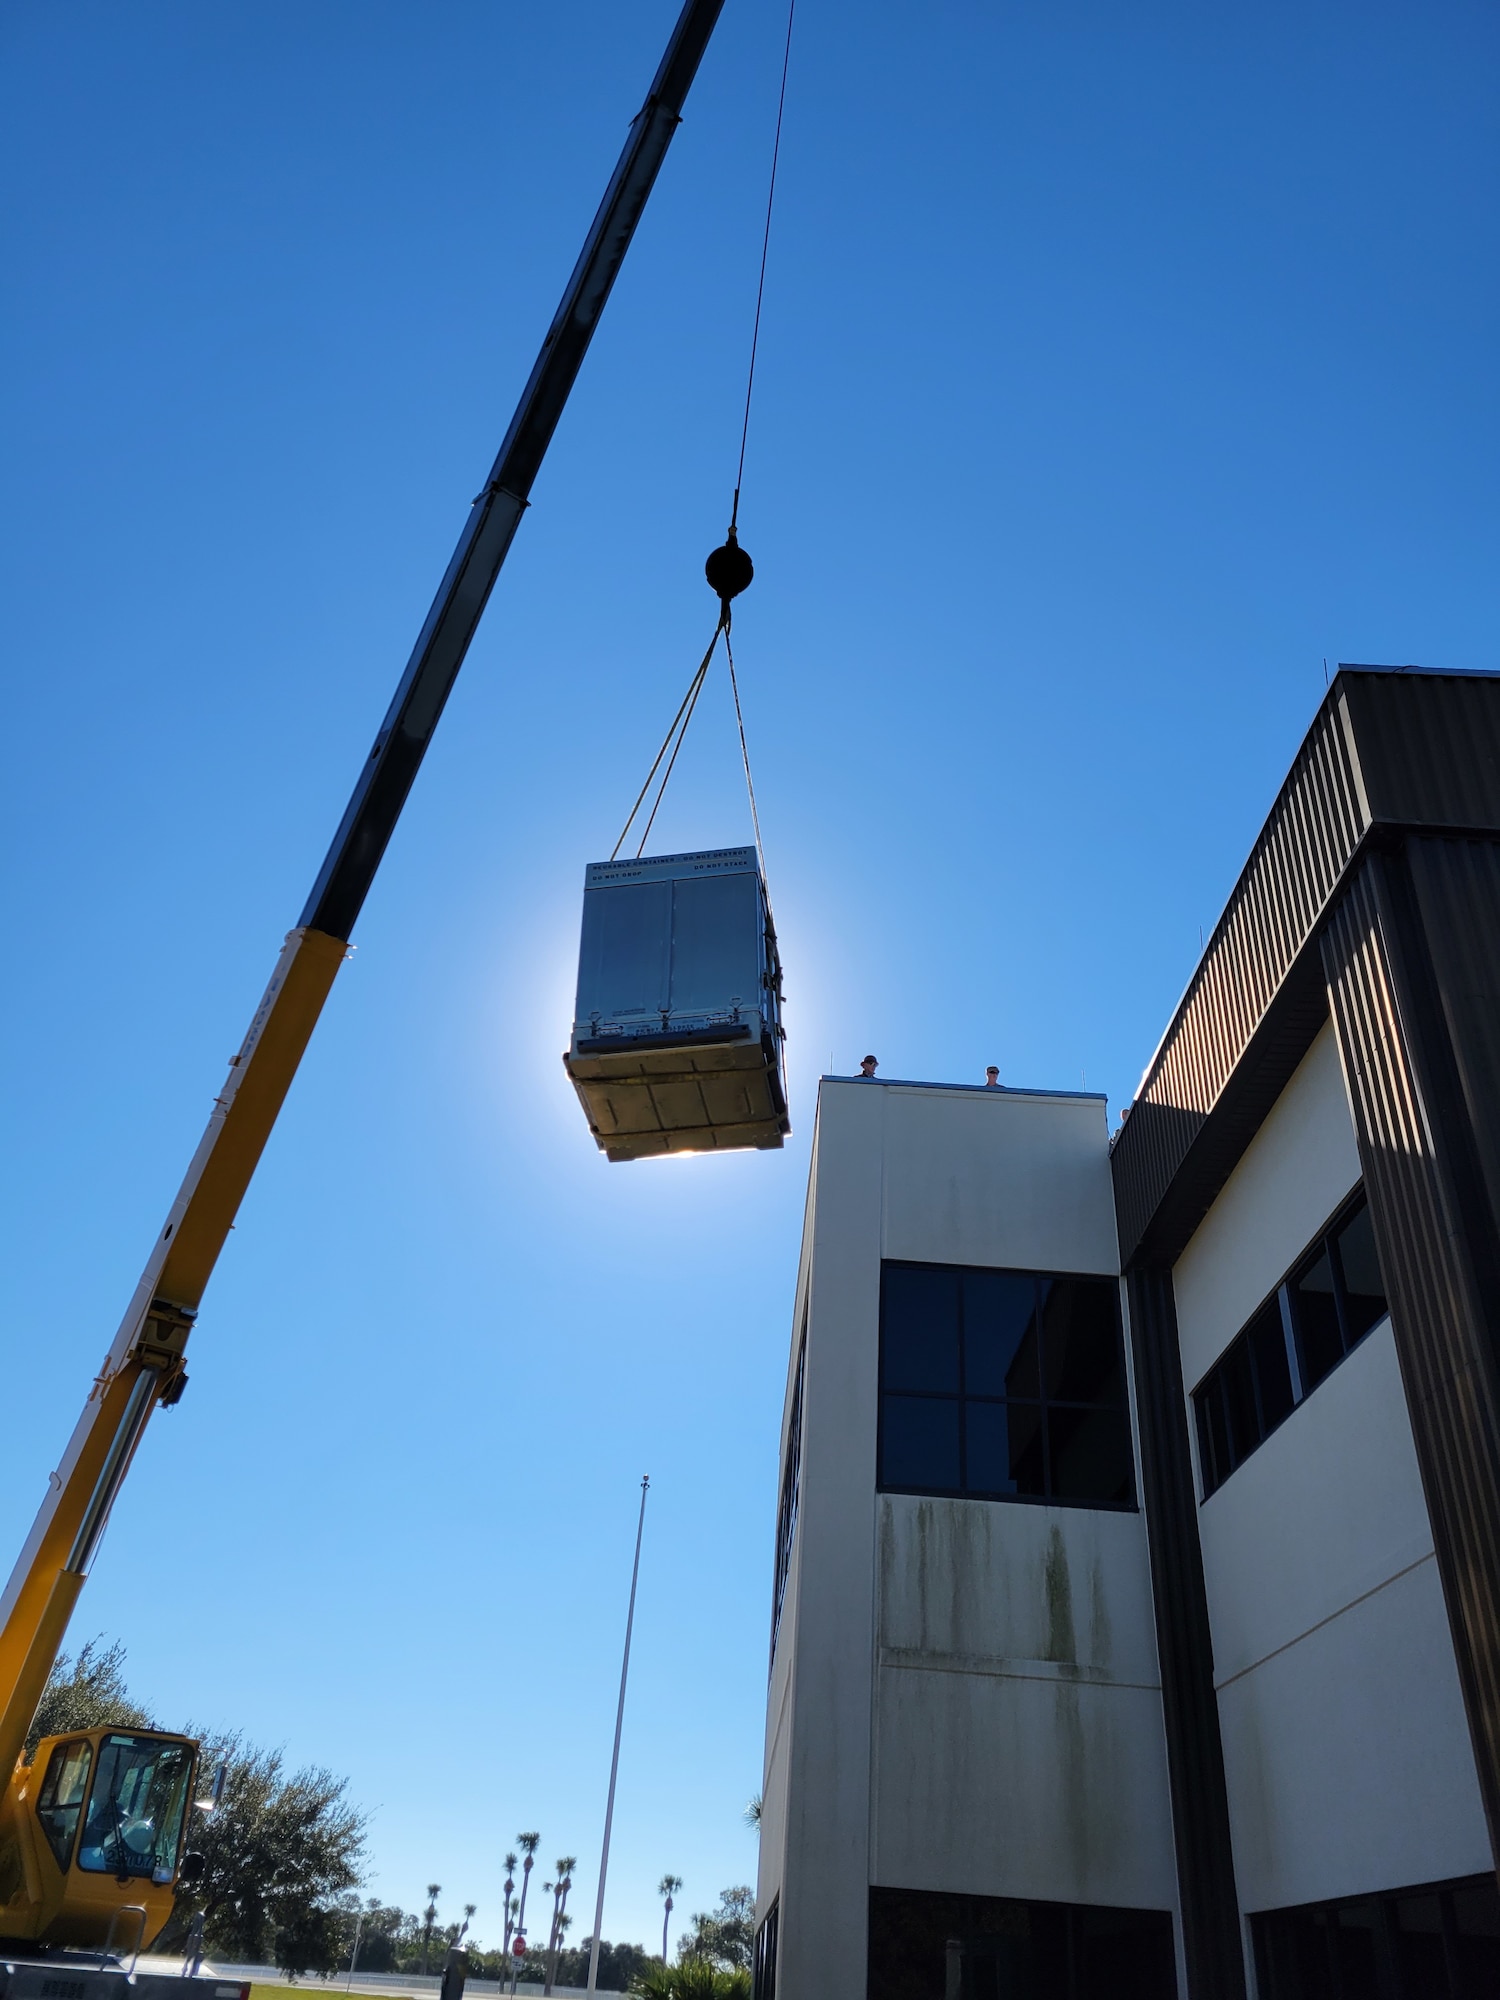 Airmen from the 2d Combat Weather Systems Squadron use a crane to install a Portable Doppler Radar weather system to assist Guardians with space launch operations at Cape Canaveral Space Force Station, Florida.